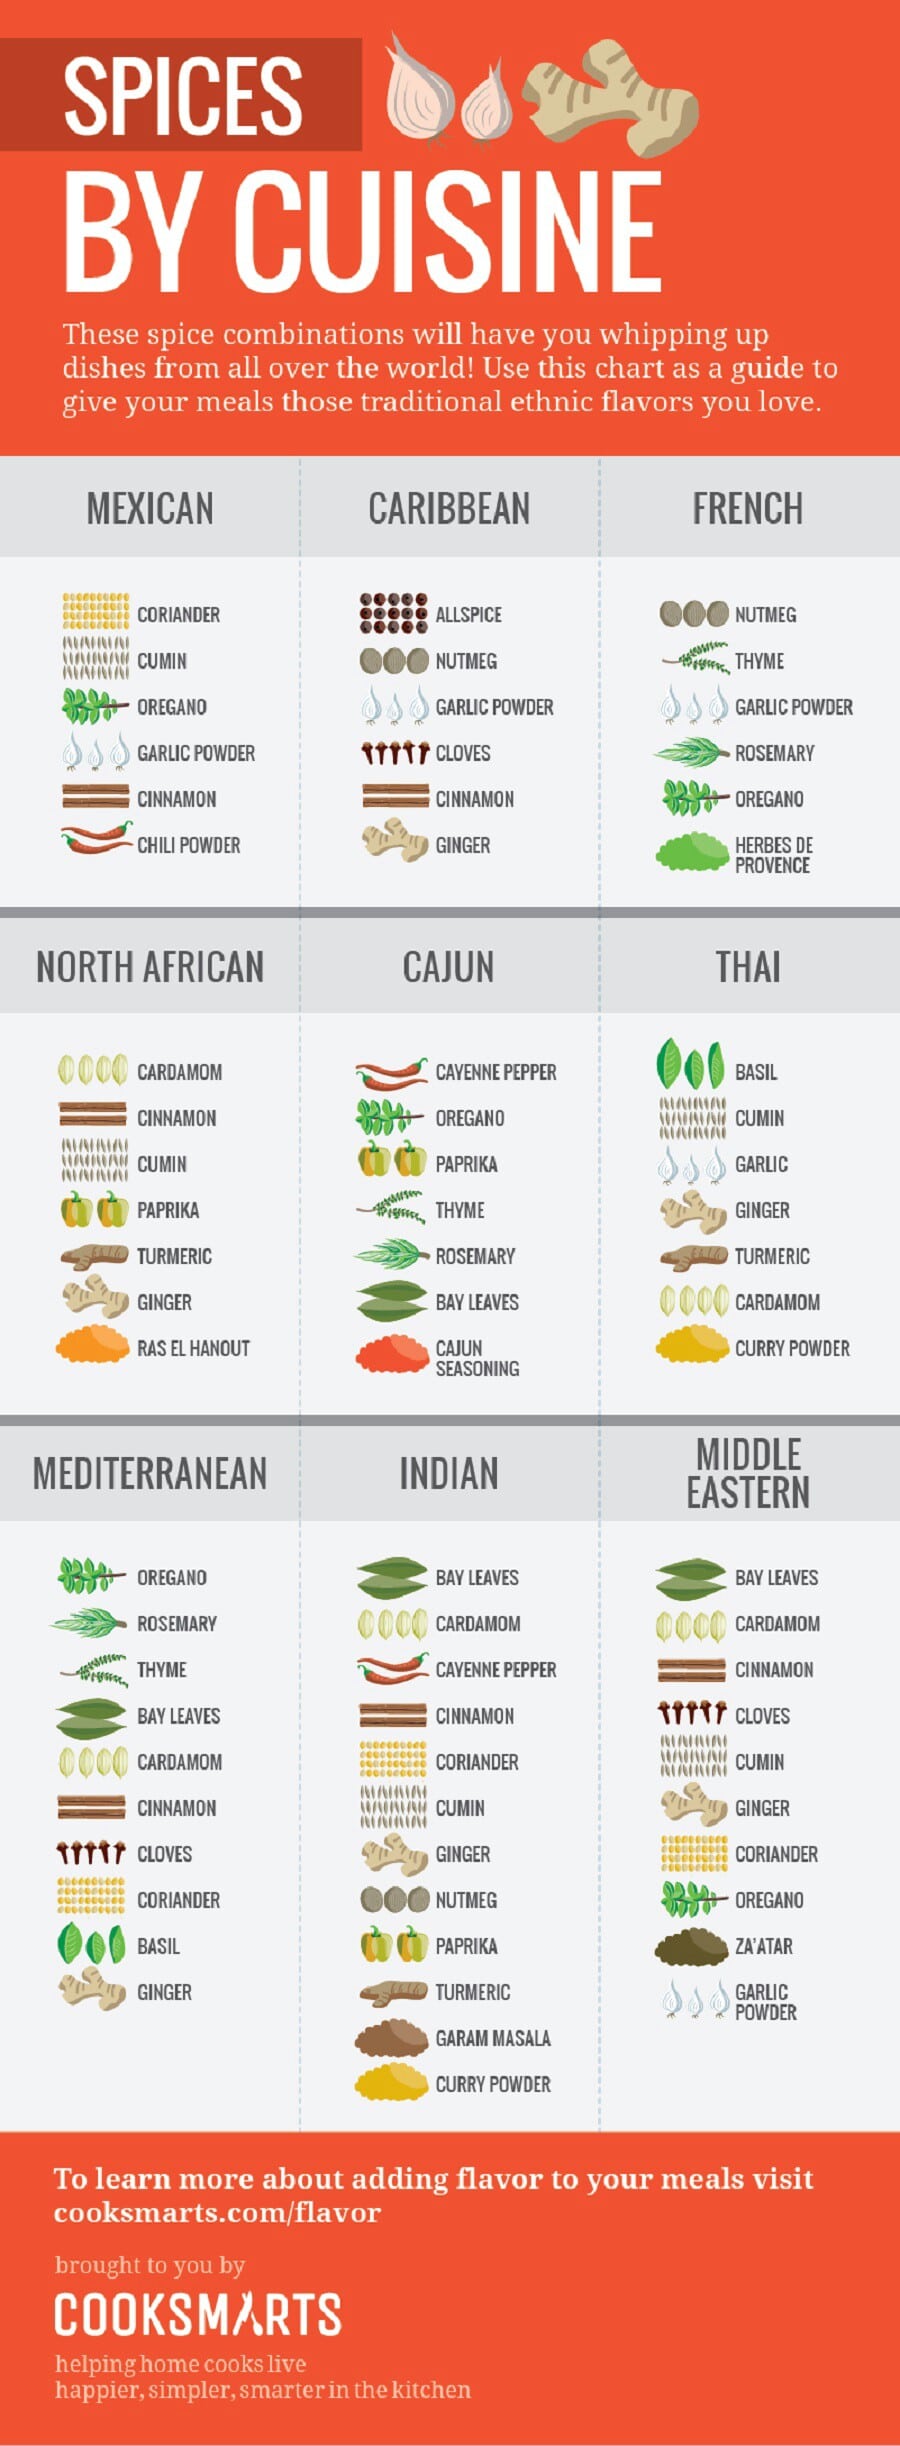 60 Professional Cooking Diagrams and Charts That Simplify Cooking